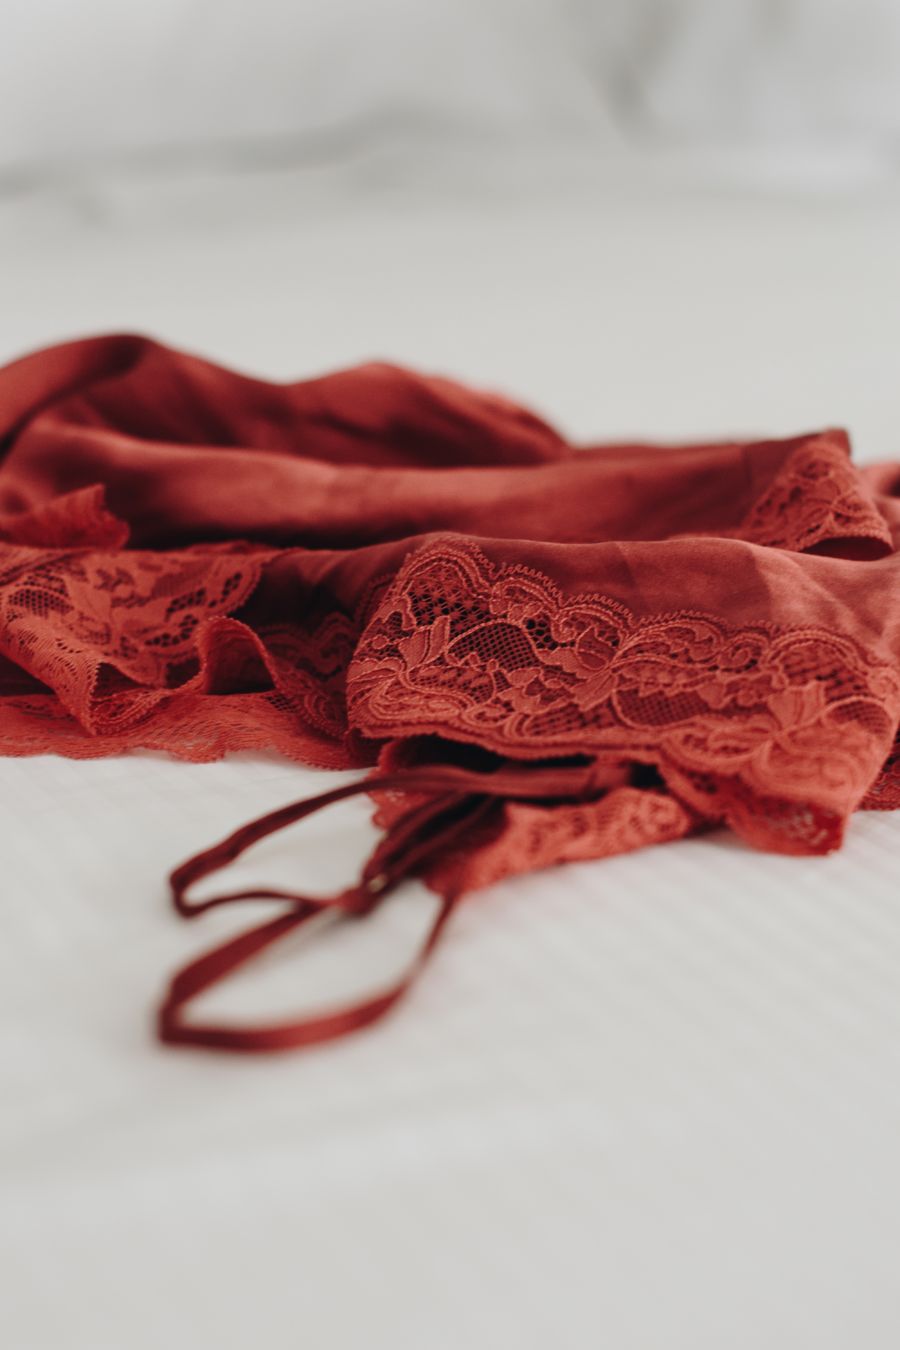 Red lacy lingerie garment